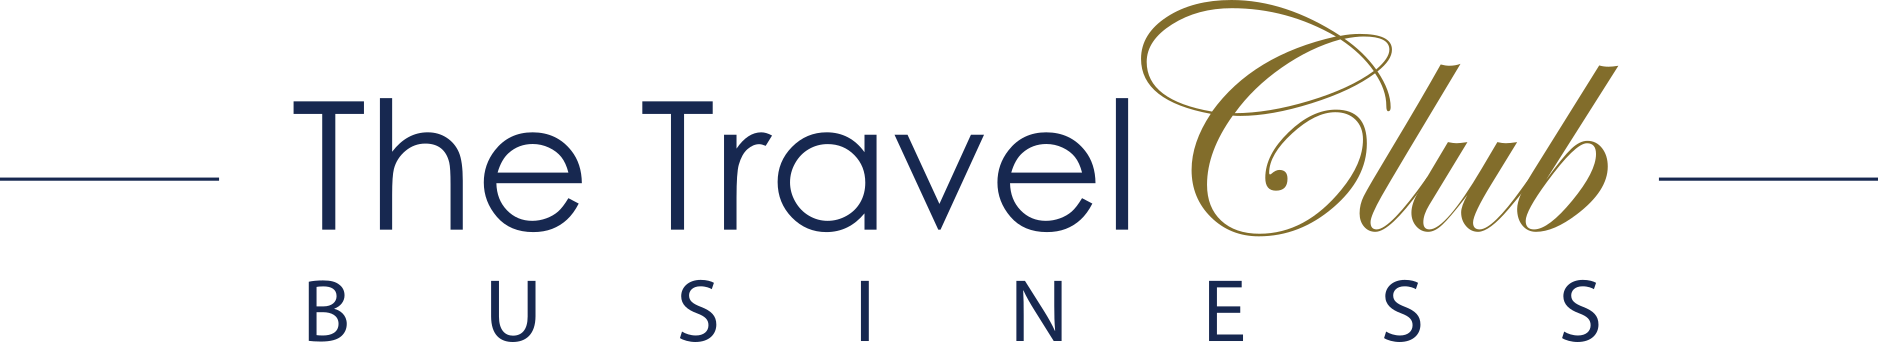 The Travel Club Business